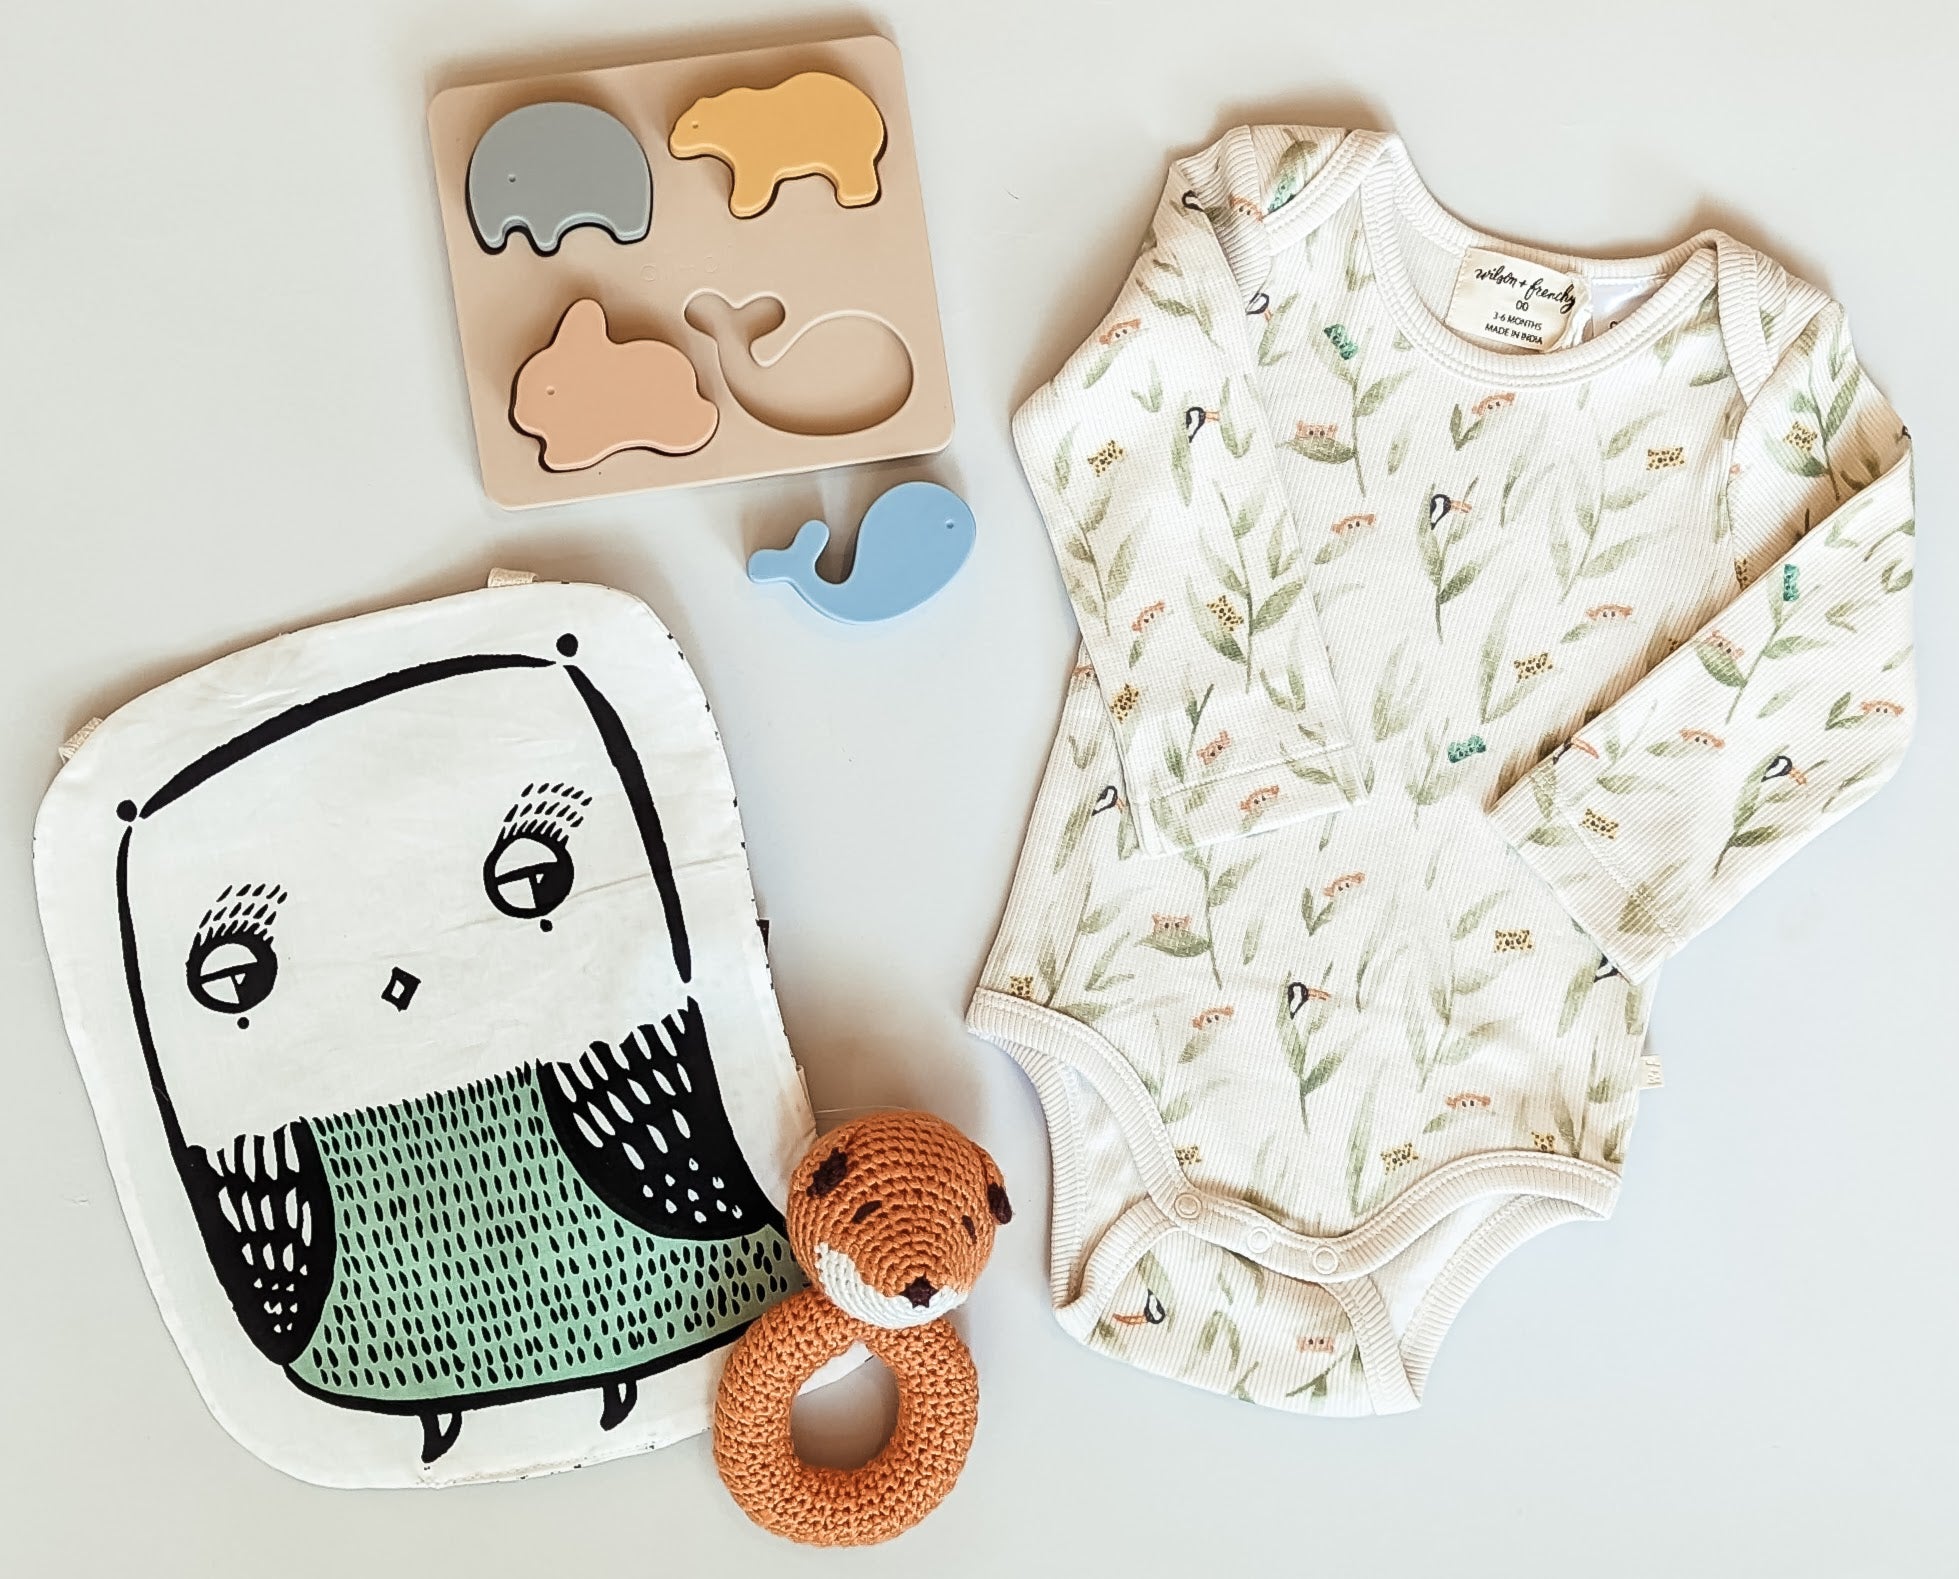 Unique baby shower gifts with an animal theme